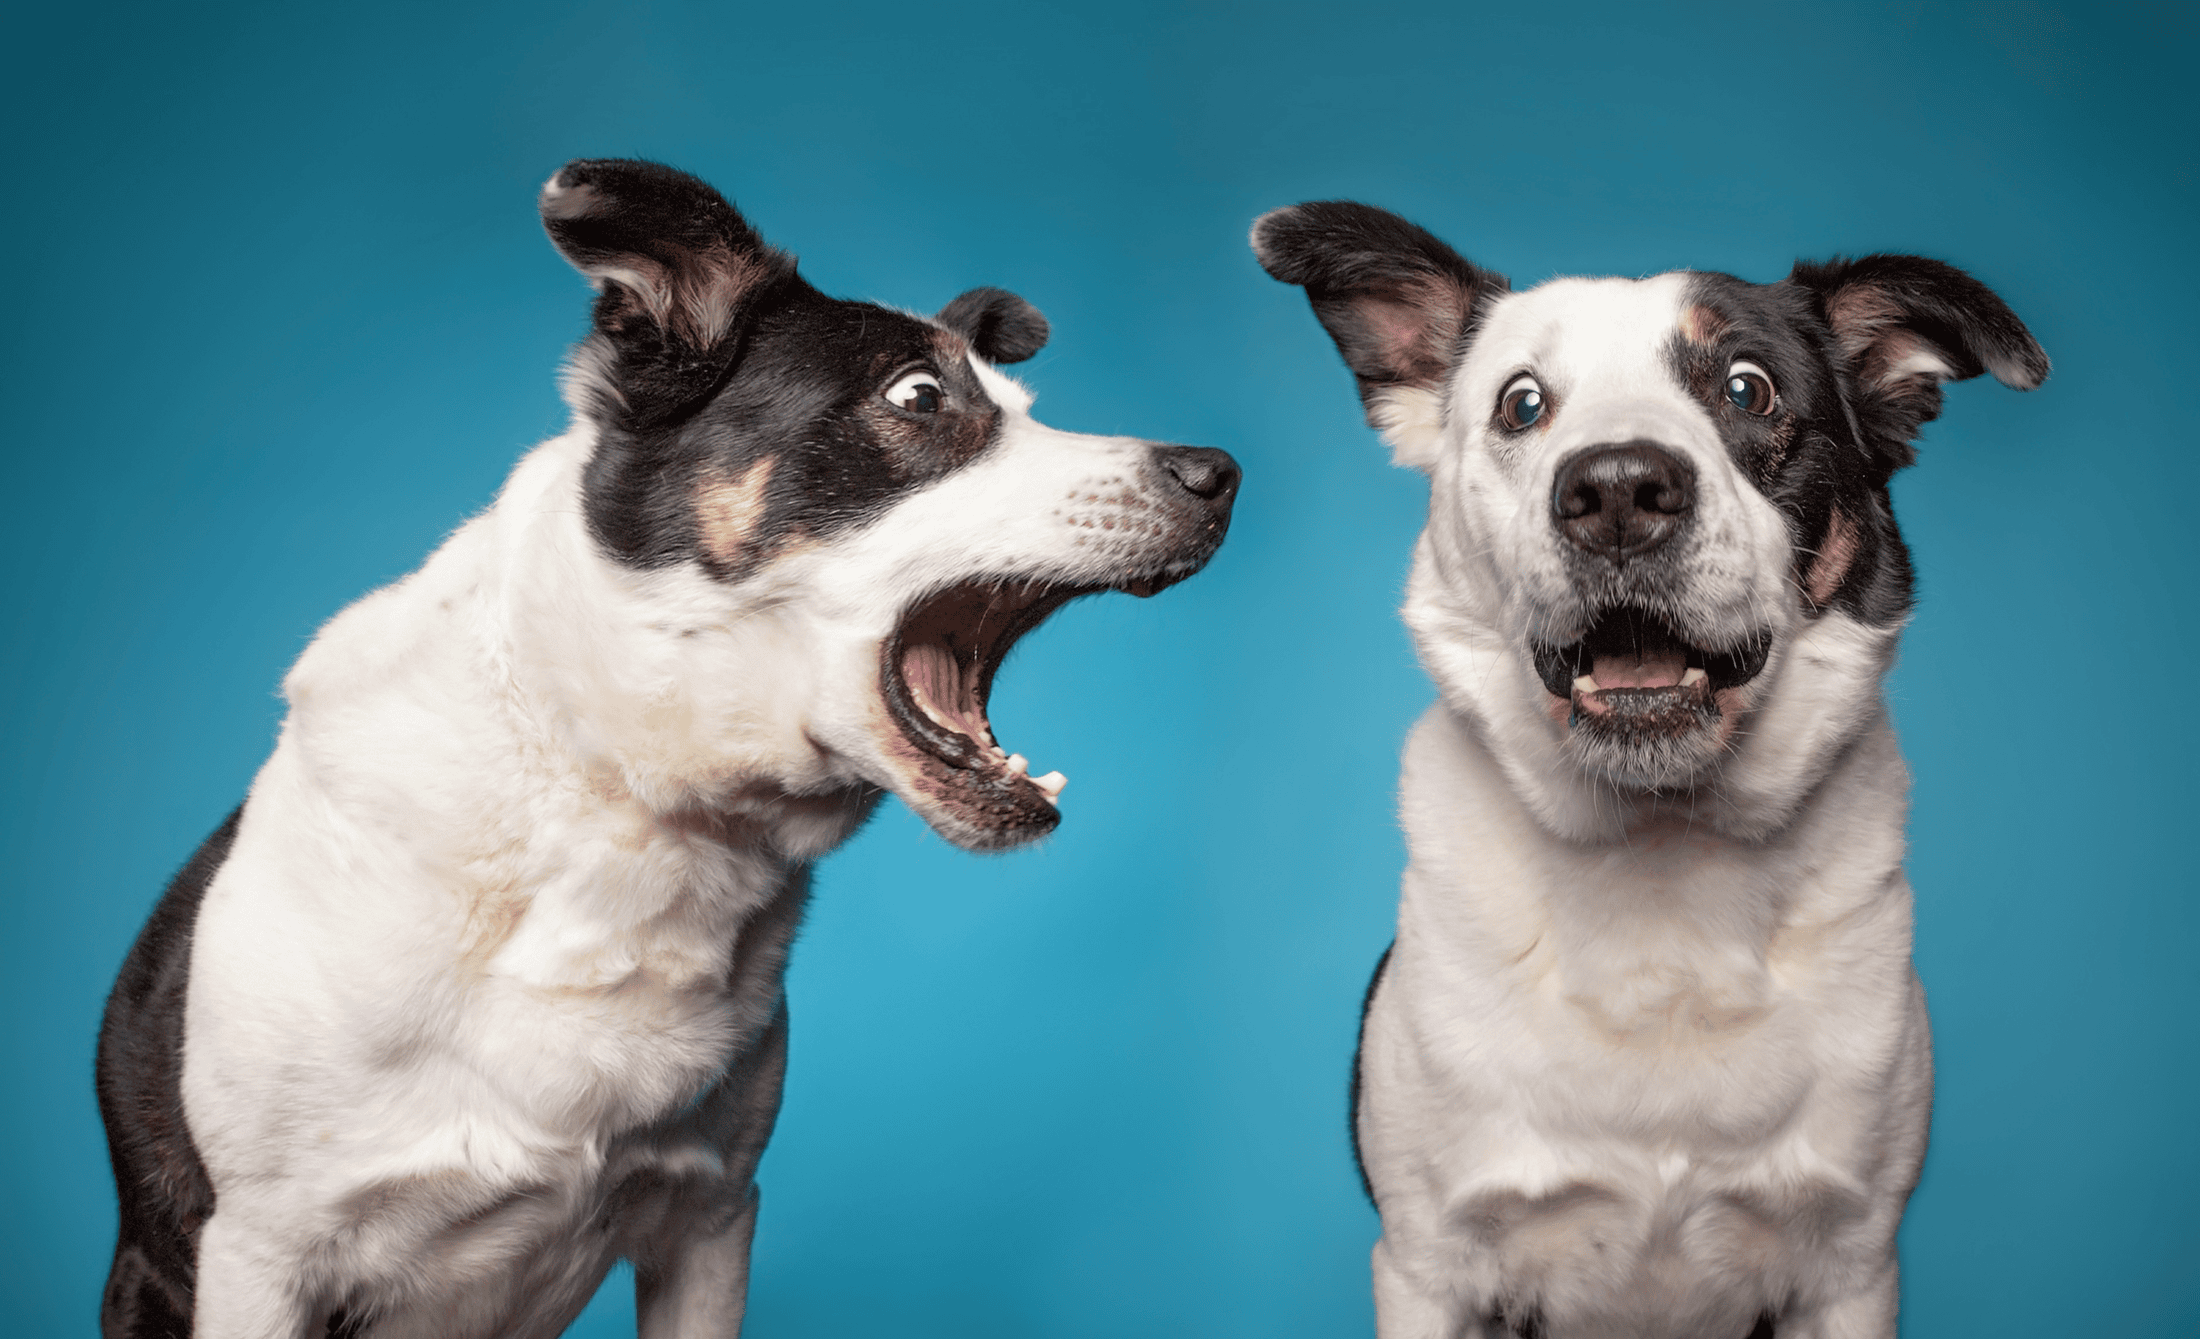 Read dog body language signals when your dog communicates with other dogs. Remember, a fearful dog can become an aggressive dog.